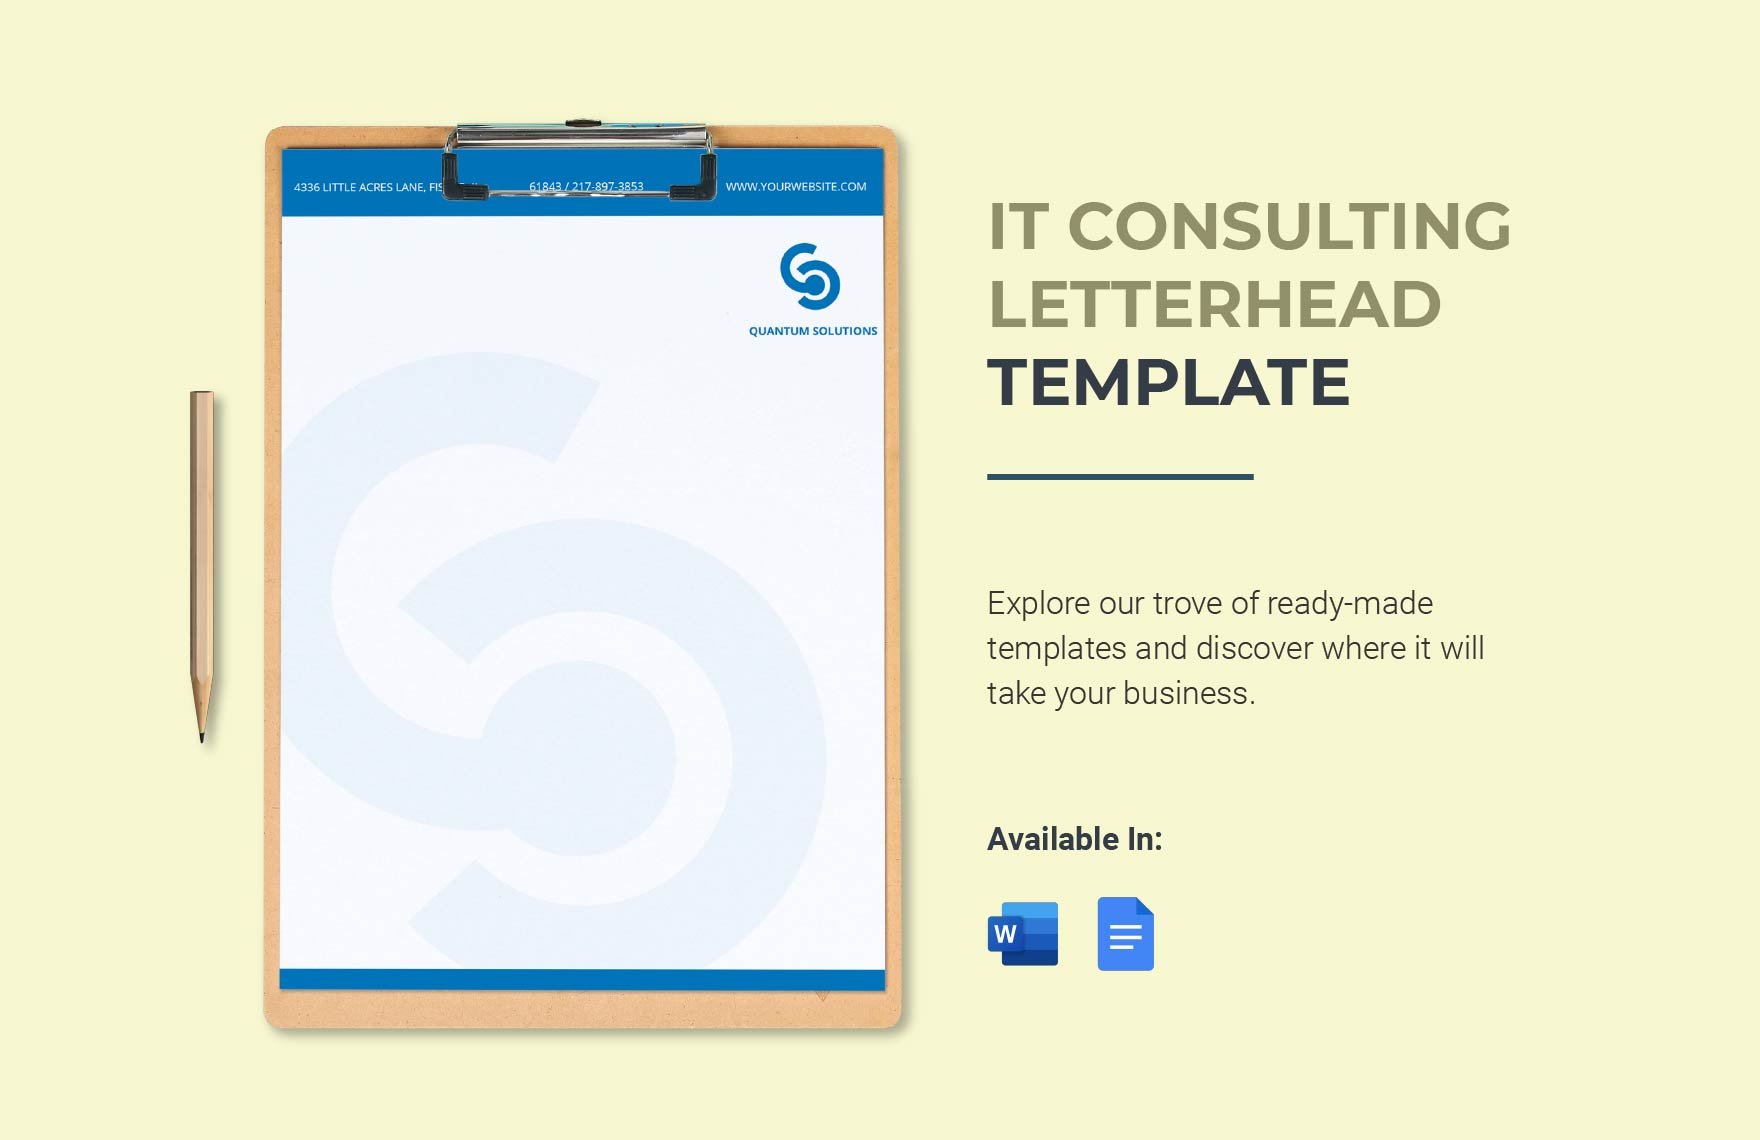 IT Consulting Letterhead Template